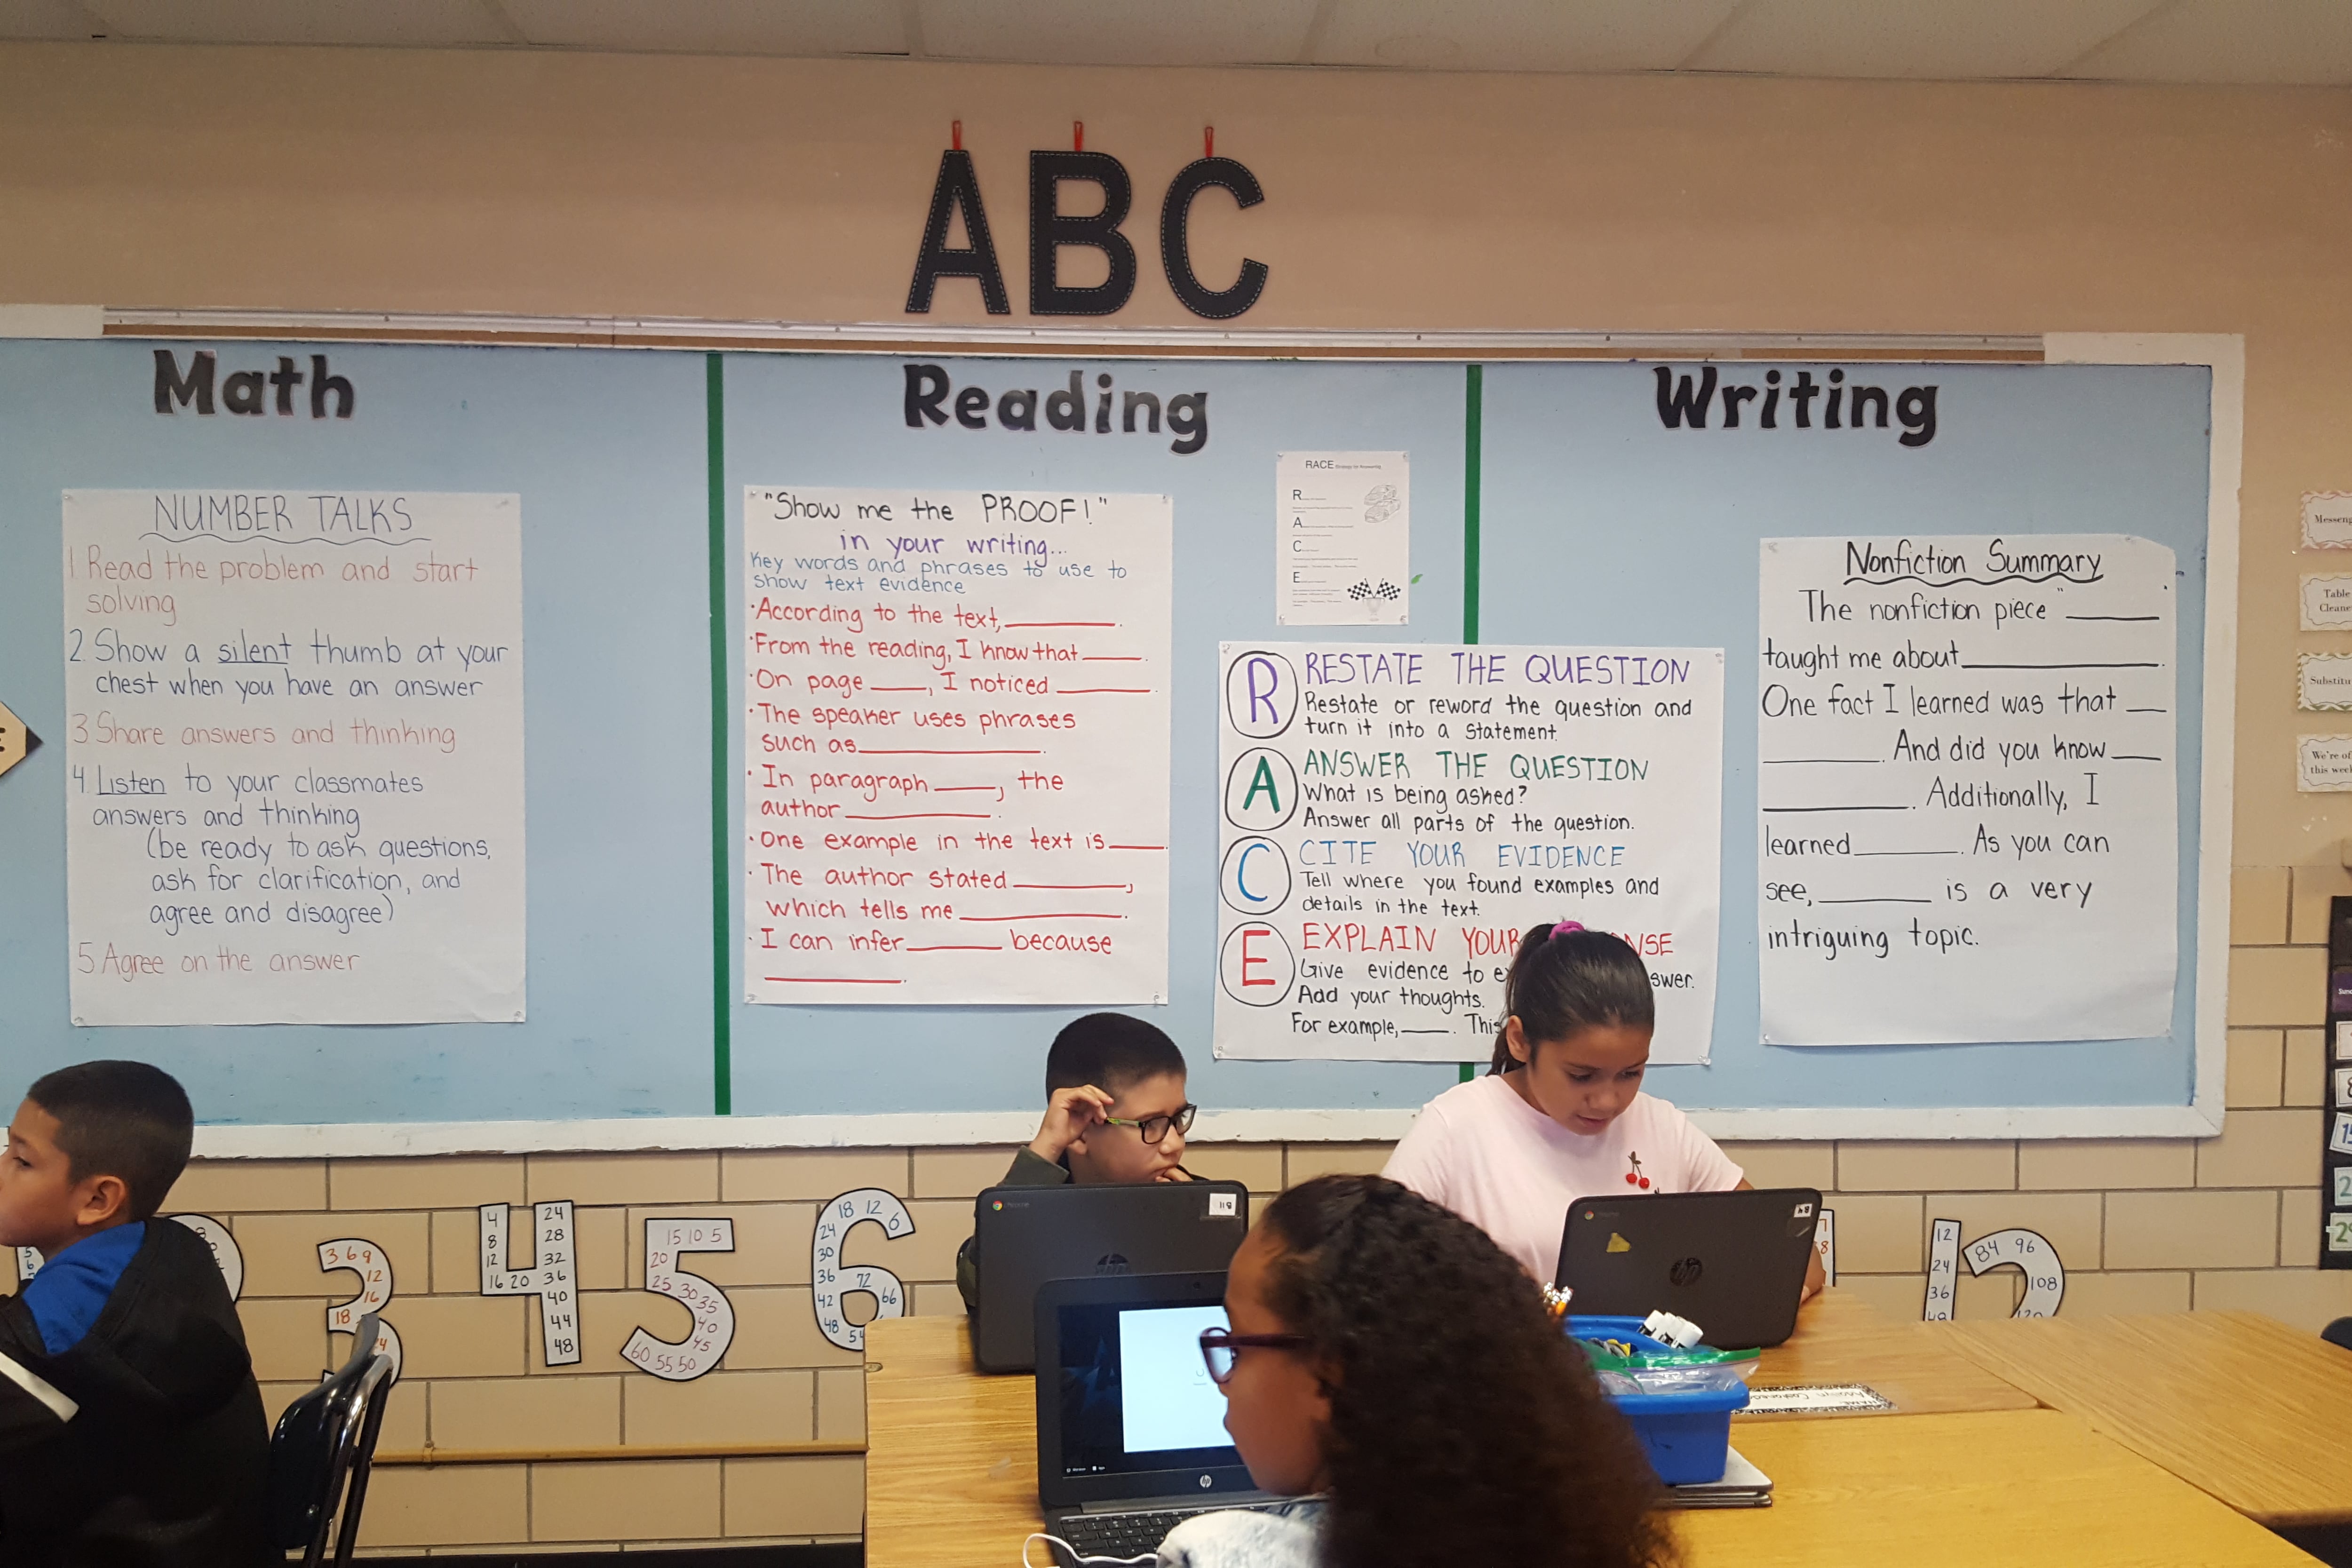 Elementary students work at their desks. The wall behind them is decorated with math, reading, and writing lessons. Large letters ABC are above.